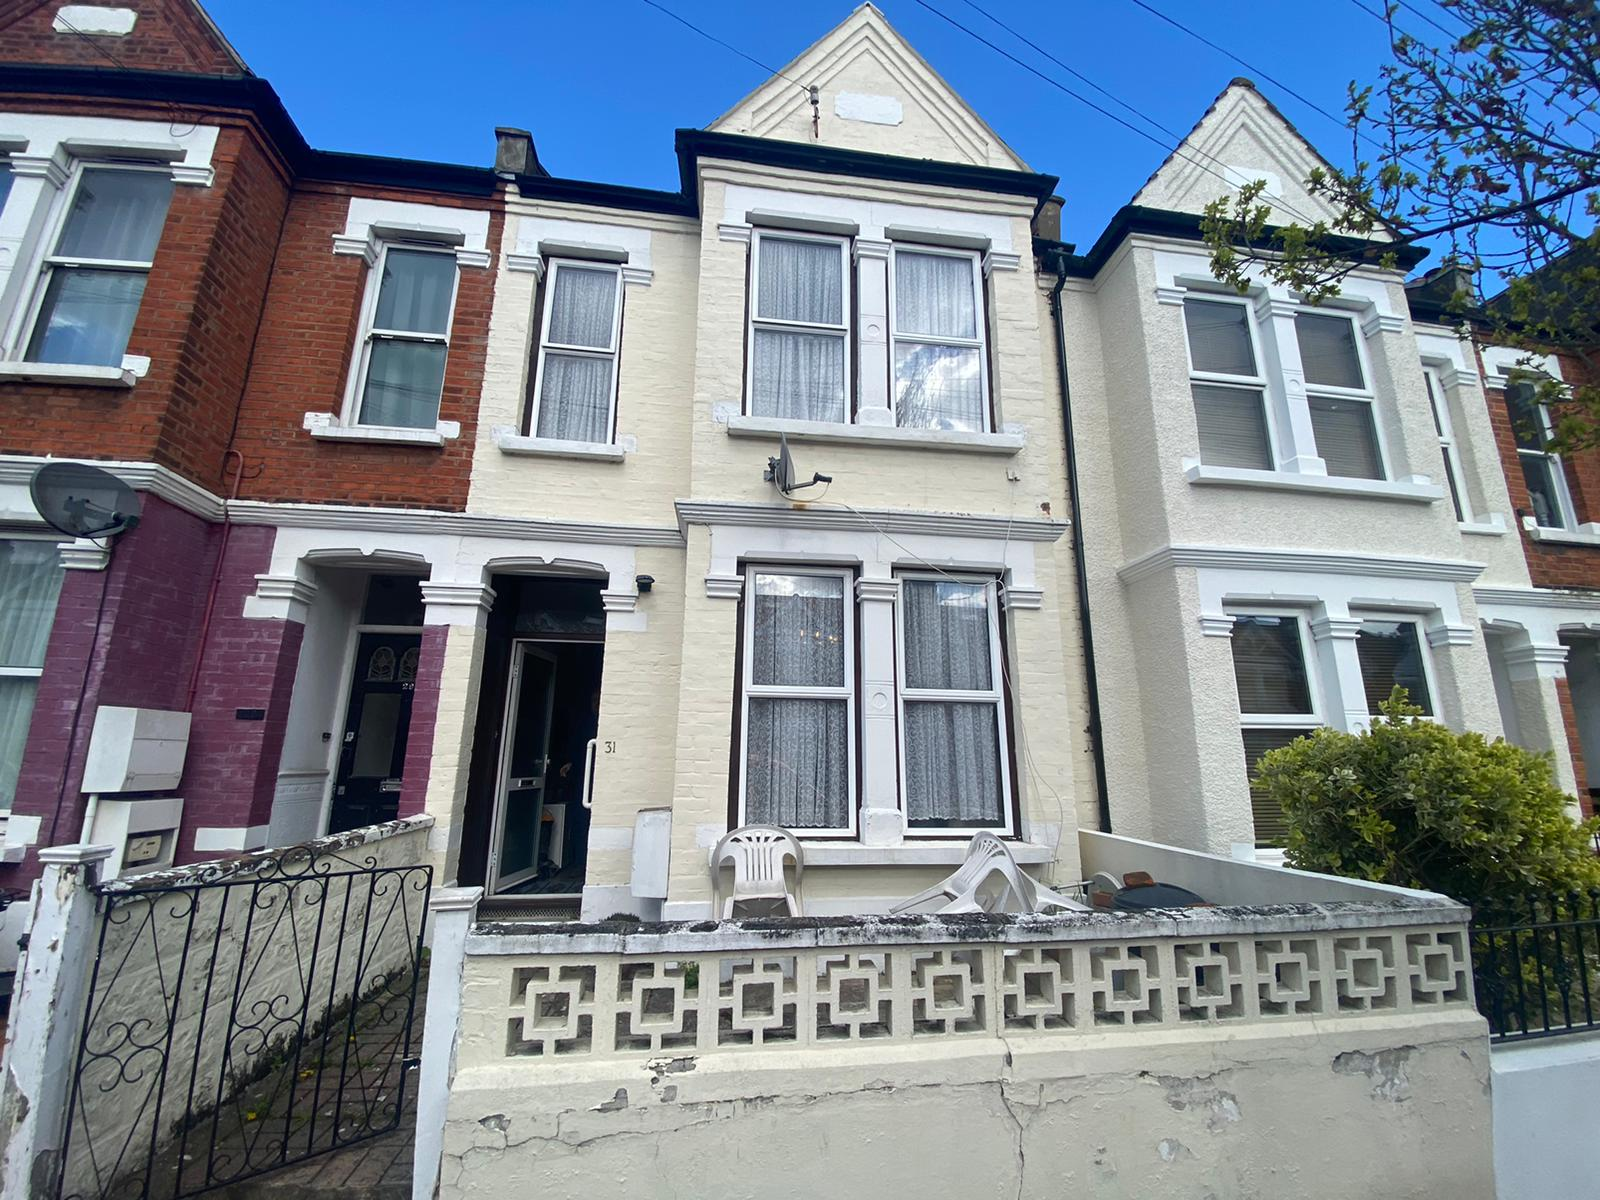 FREEHOLD – 4 BEDROOM TERRACED HOUSE, EASTWOOD STREET, SW16